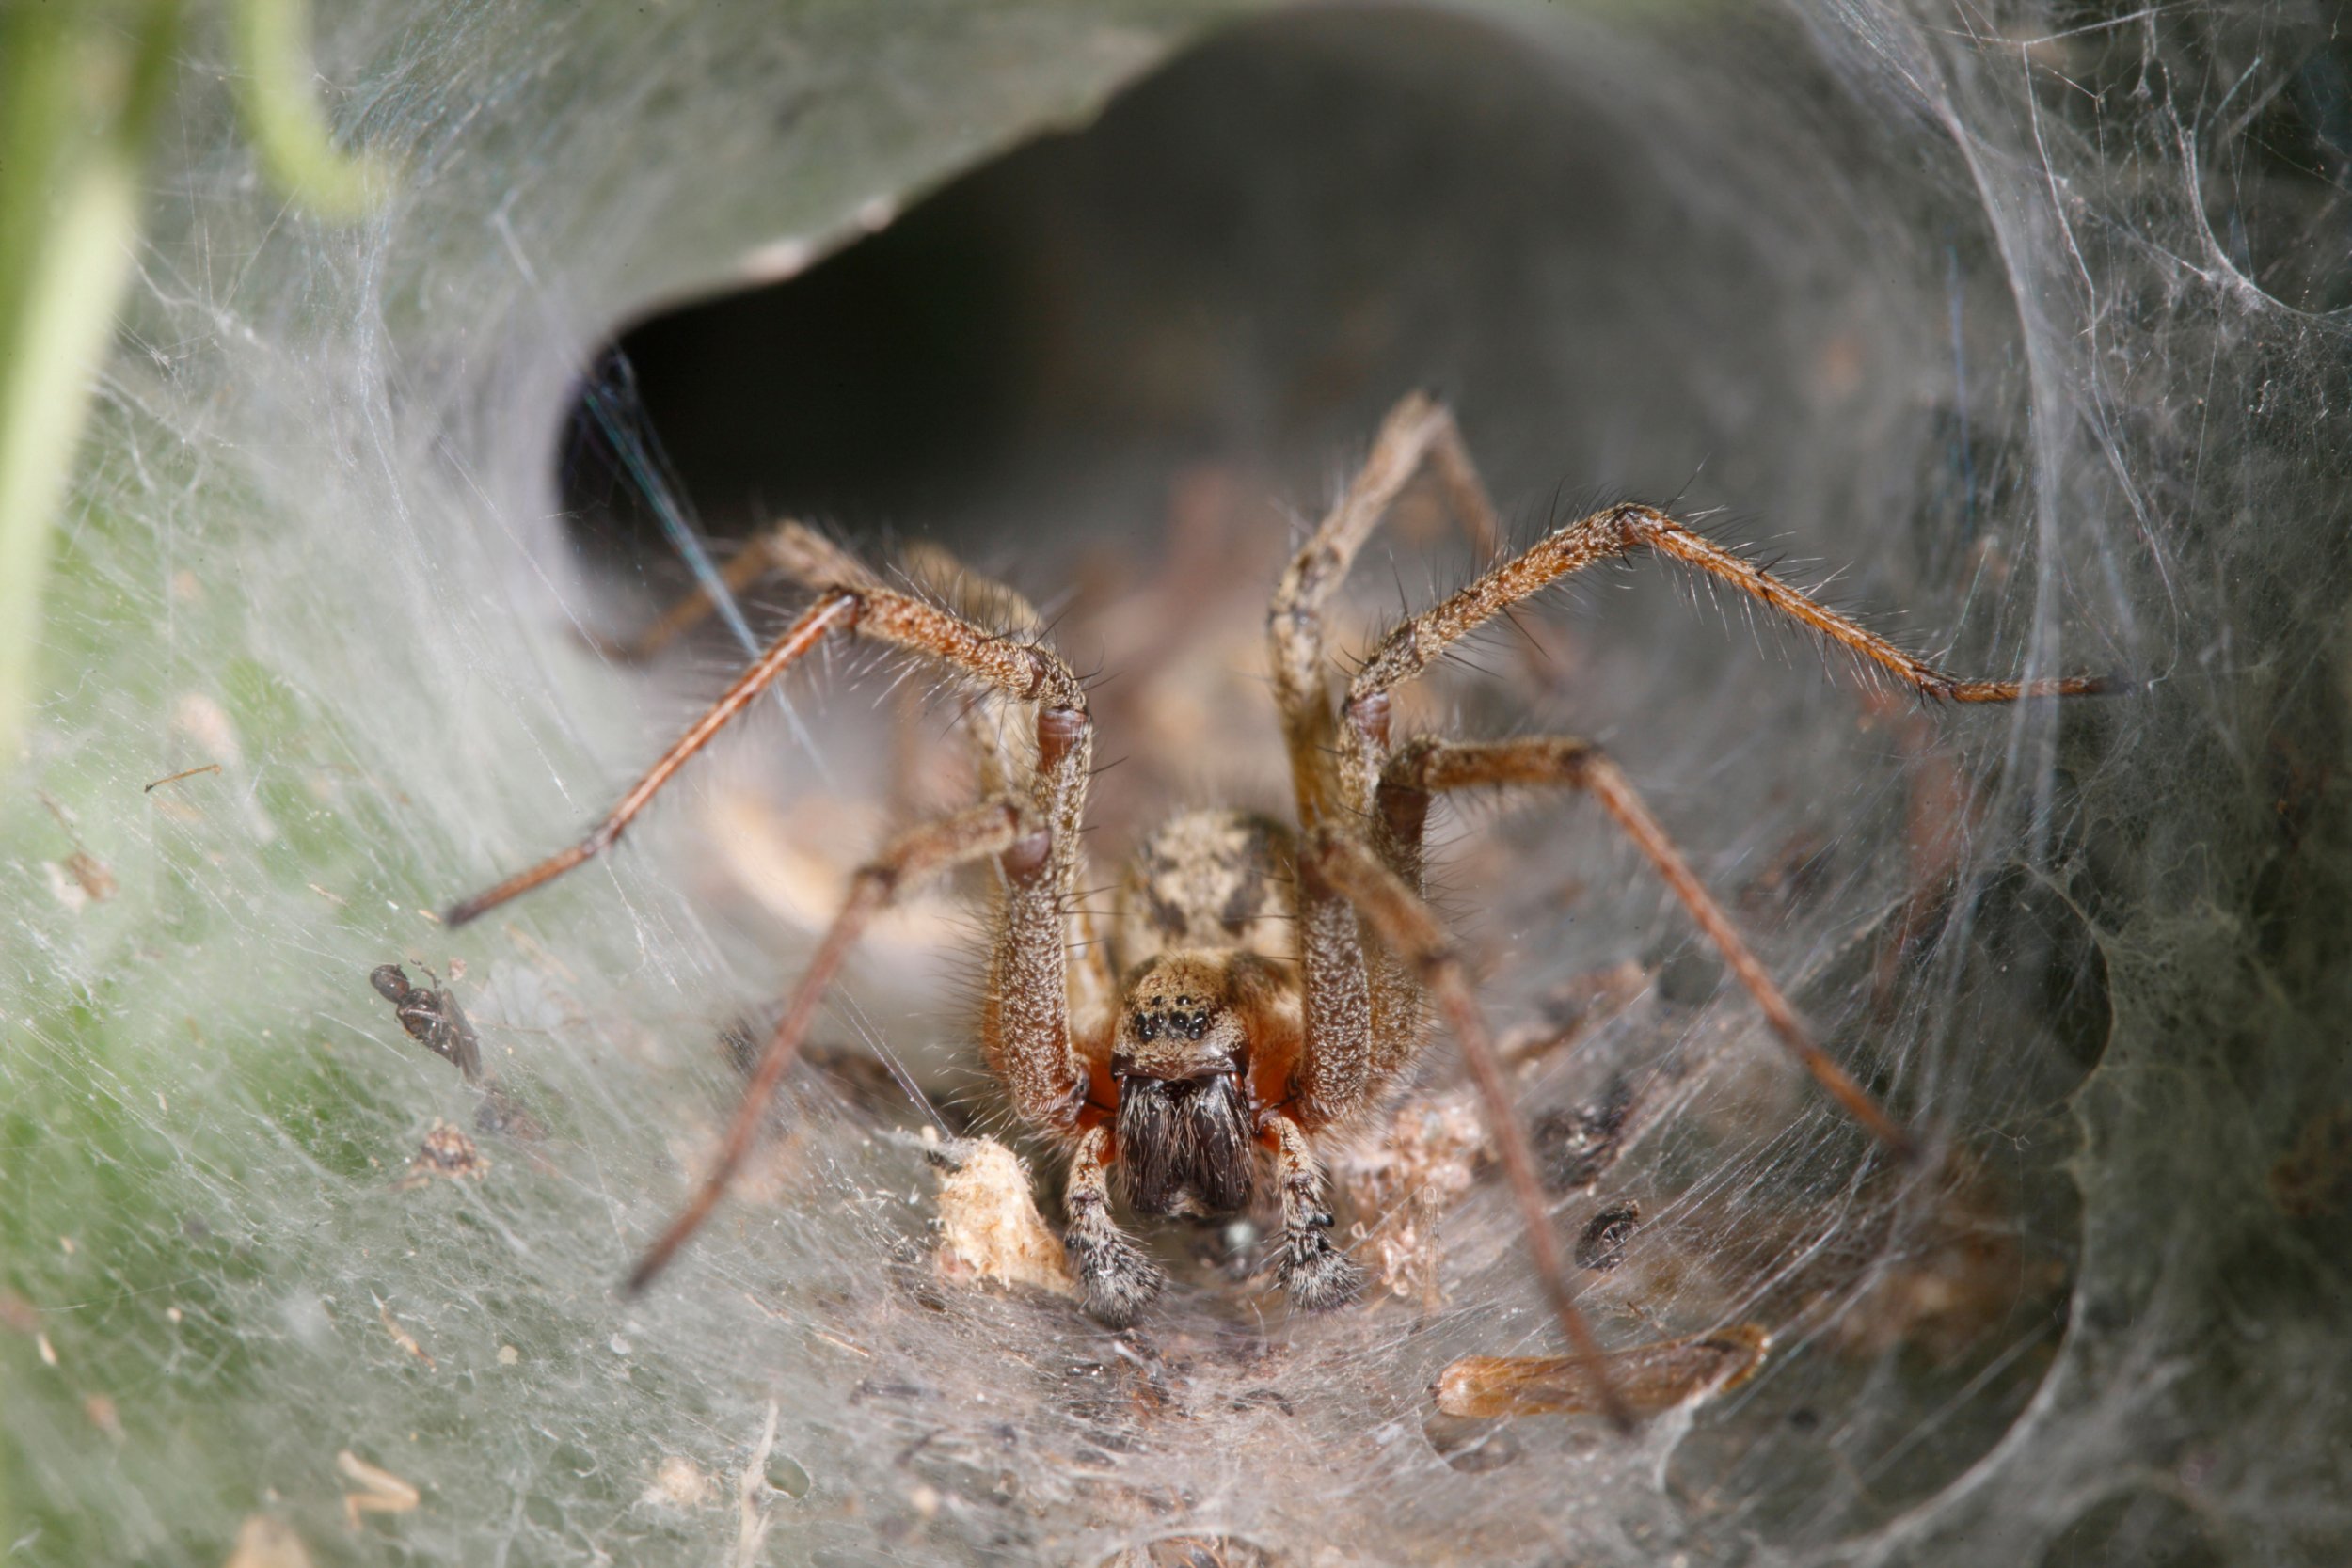 See the 9 Most Colorful Spiders Found Crawling Around England